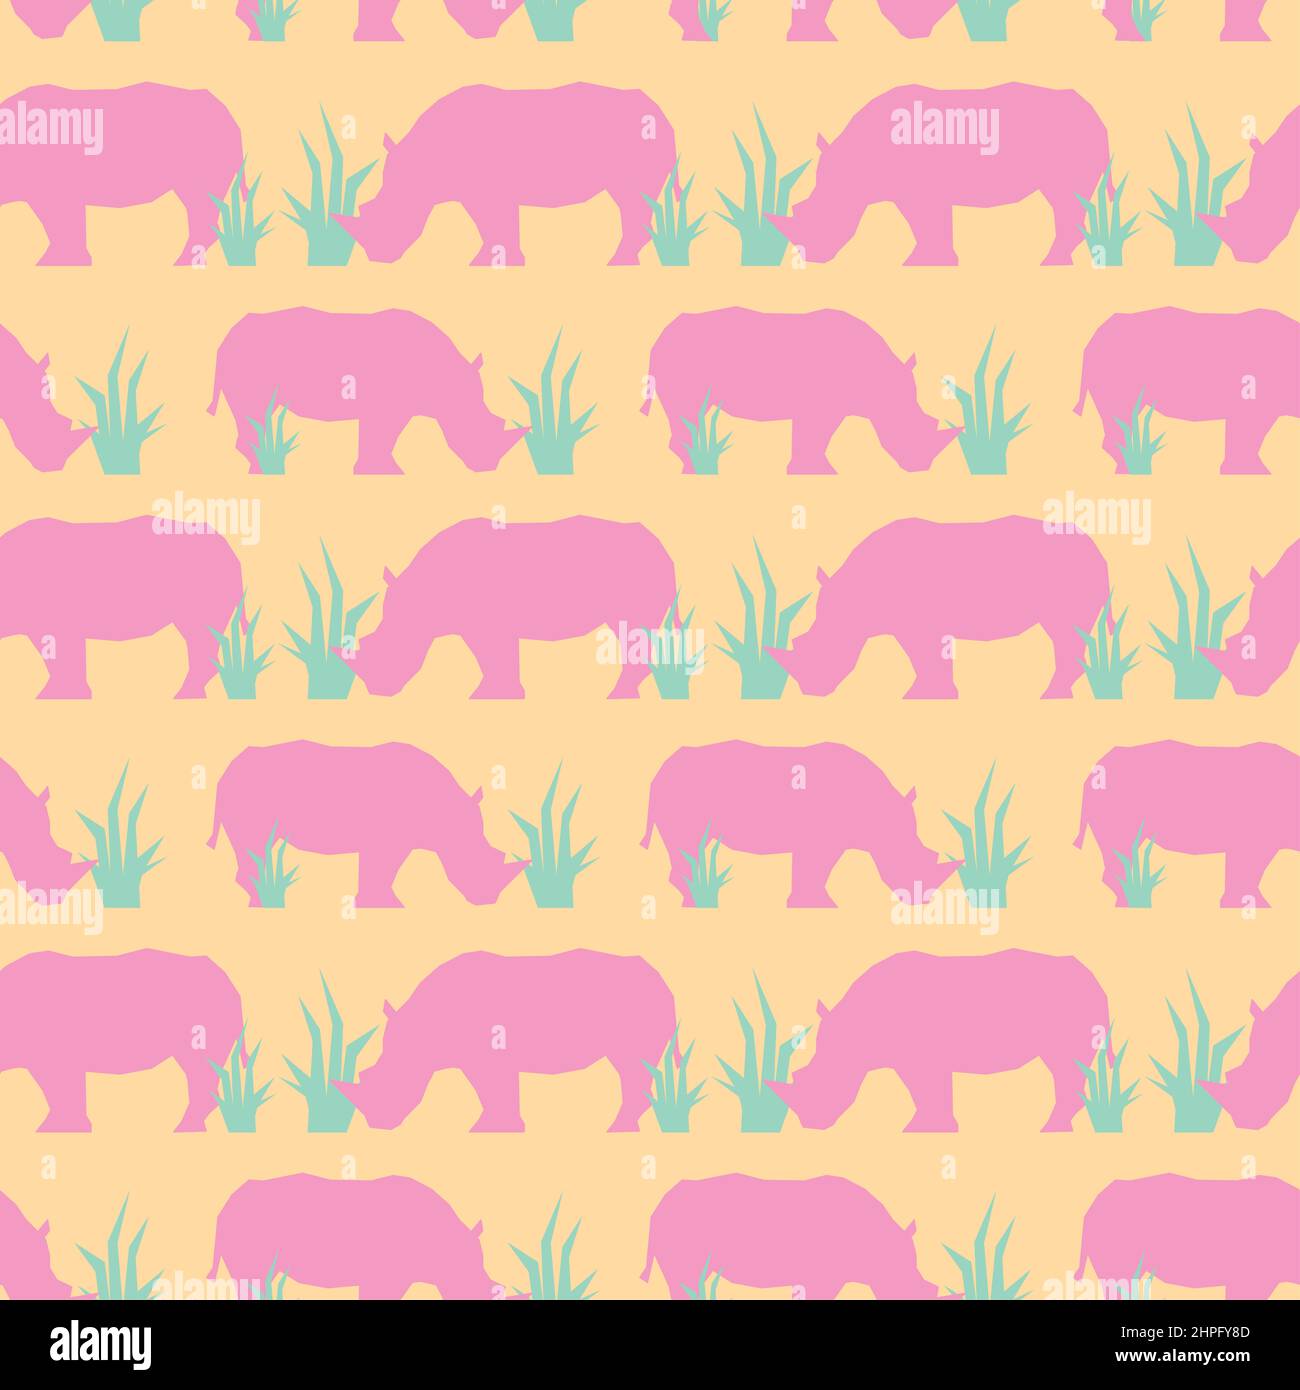 Cute vector pattern of pink rhinos eating grass, seamless pattern with simple shape of pink rhinos on the light-brown colour background. Stock Photo